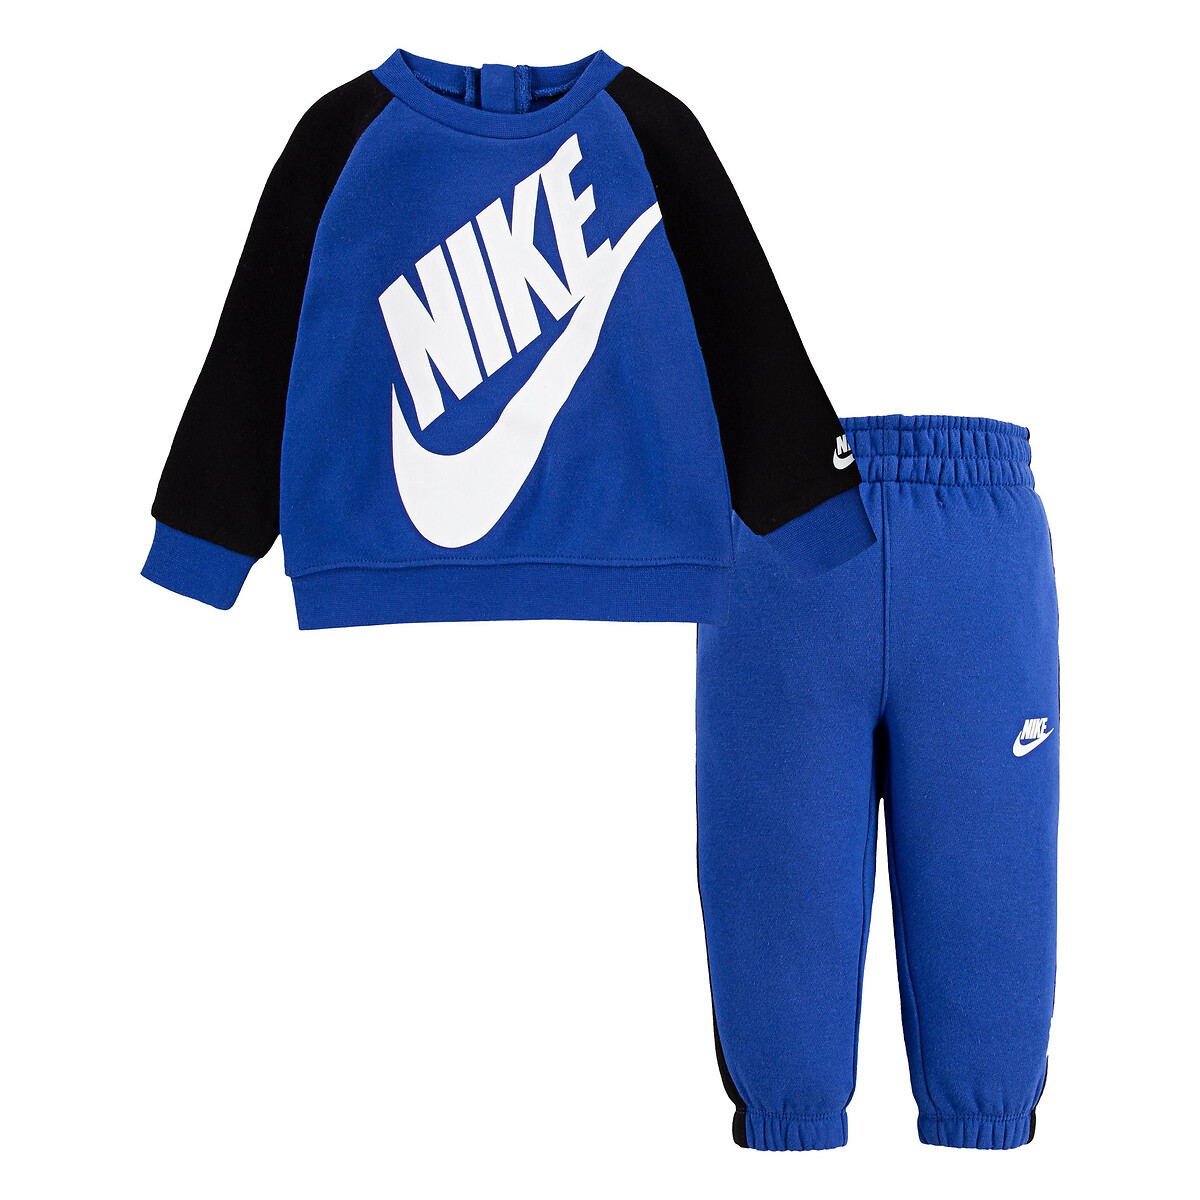 Image of Crew Neck Sweatshirt/Joggers Outfit in Cotton Mix